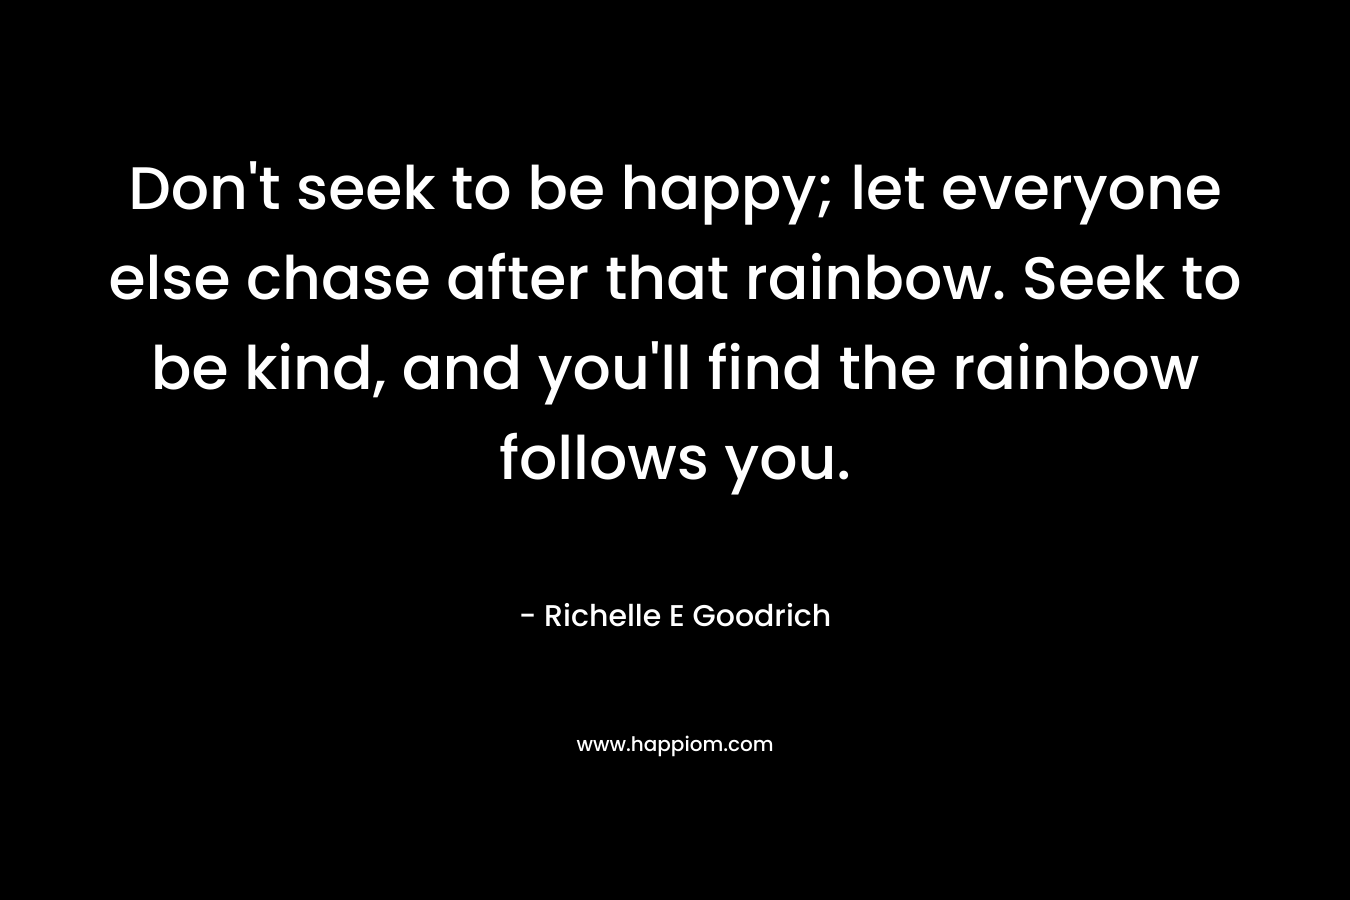 Don't seek to be happy; let everyone else chase after that rainbow. Seek to be kind, and you'll find the rainbow follows you.